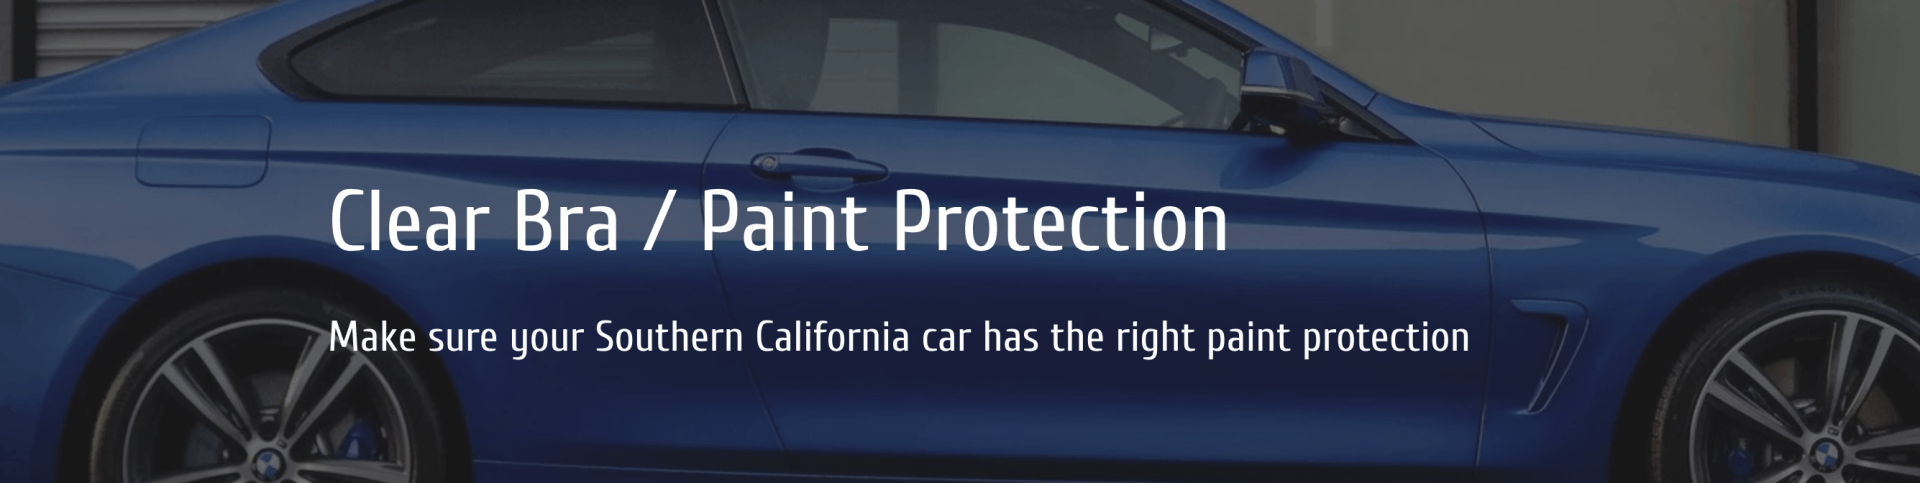 Protect your car paint with an XPEL clear bra - San Diego Vinyl